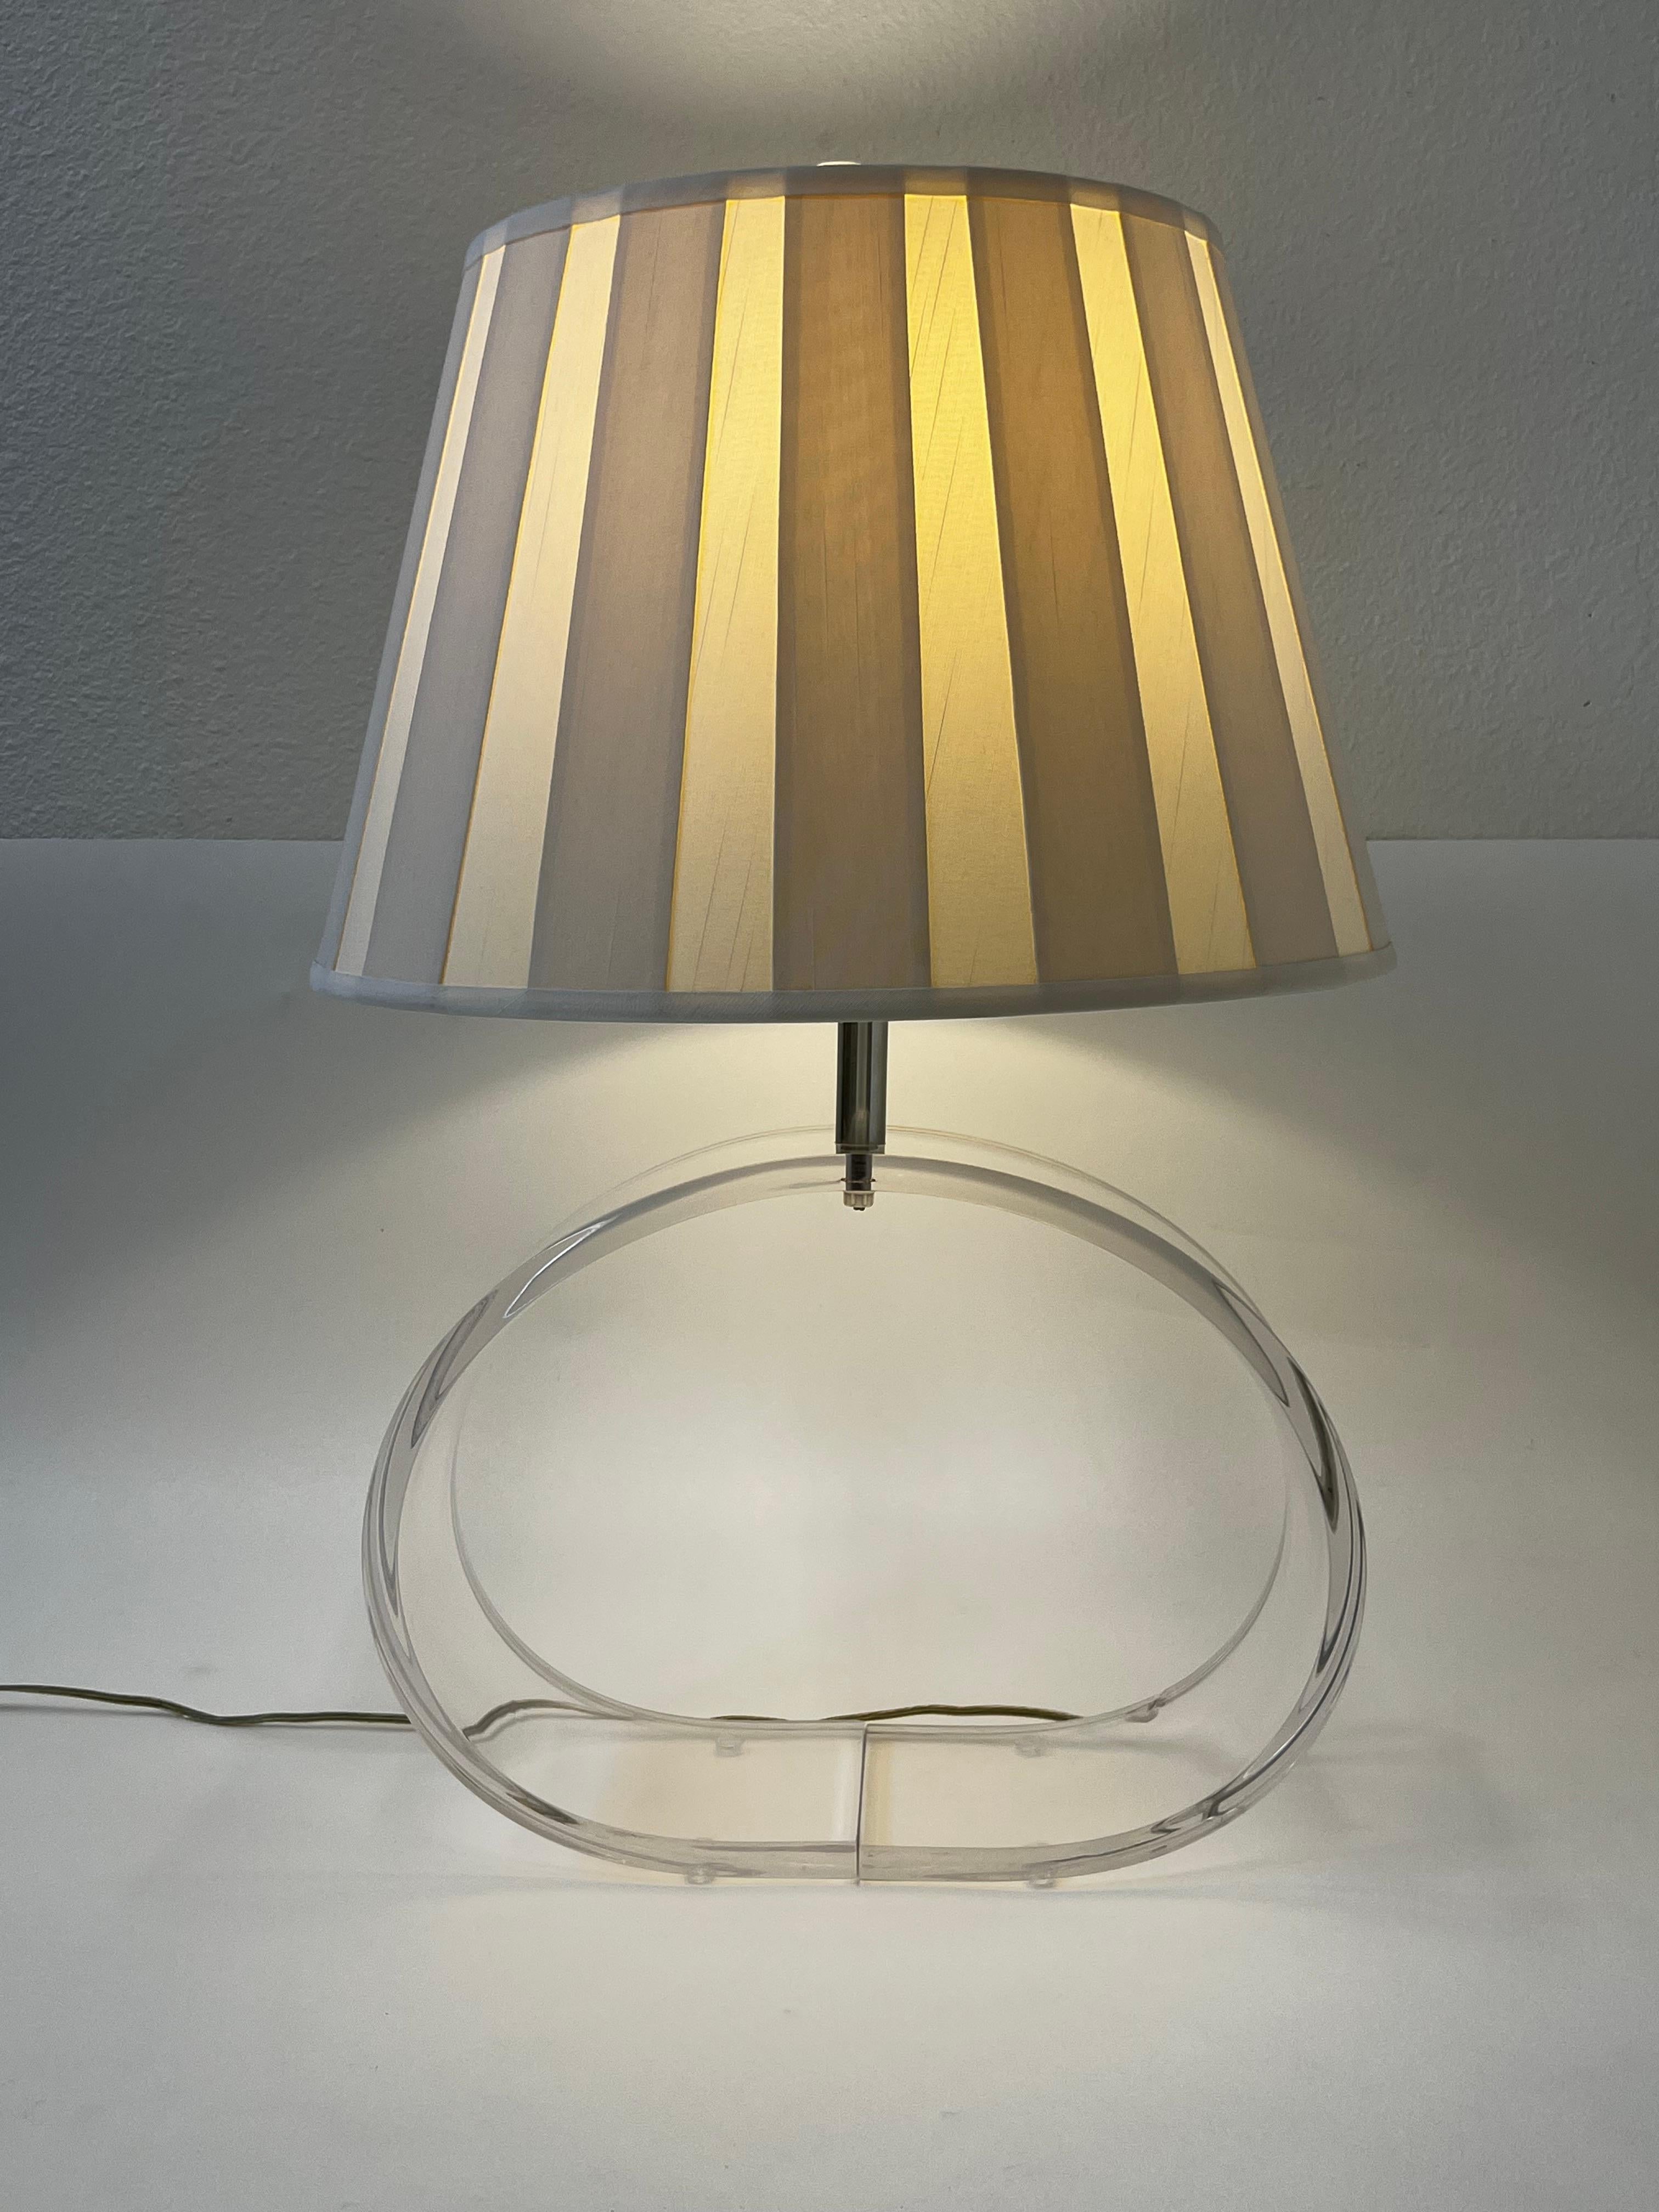 1970’s  oval clear lucite and chrome table lamp with original pleated silk shade design by Ritts Co. 

In good original vintage condition. 
It takes one 100 max Edison lightbulb. 

Measurements: 26.5” High, 16.6” Wide, 5.5” Deep,
Shade is 18”